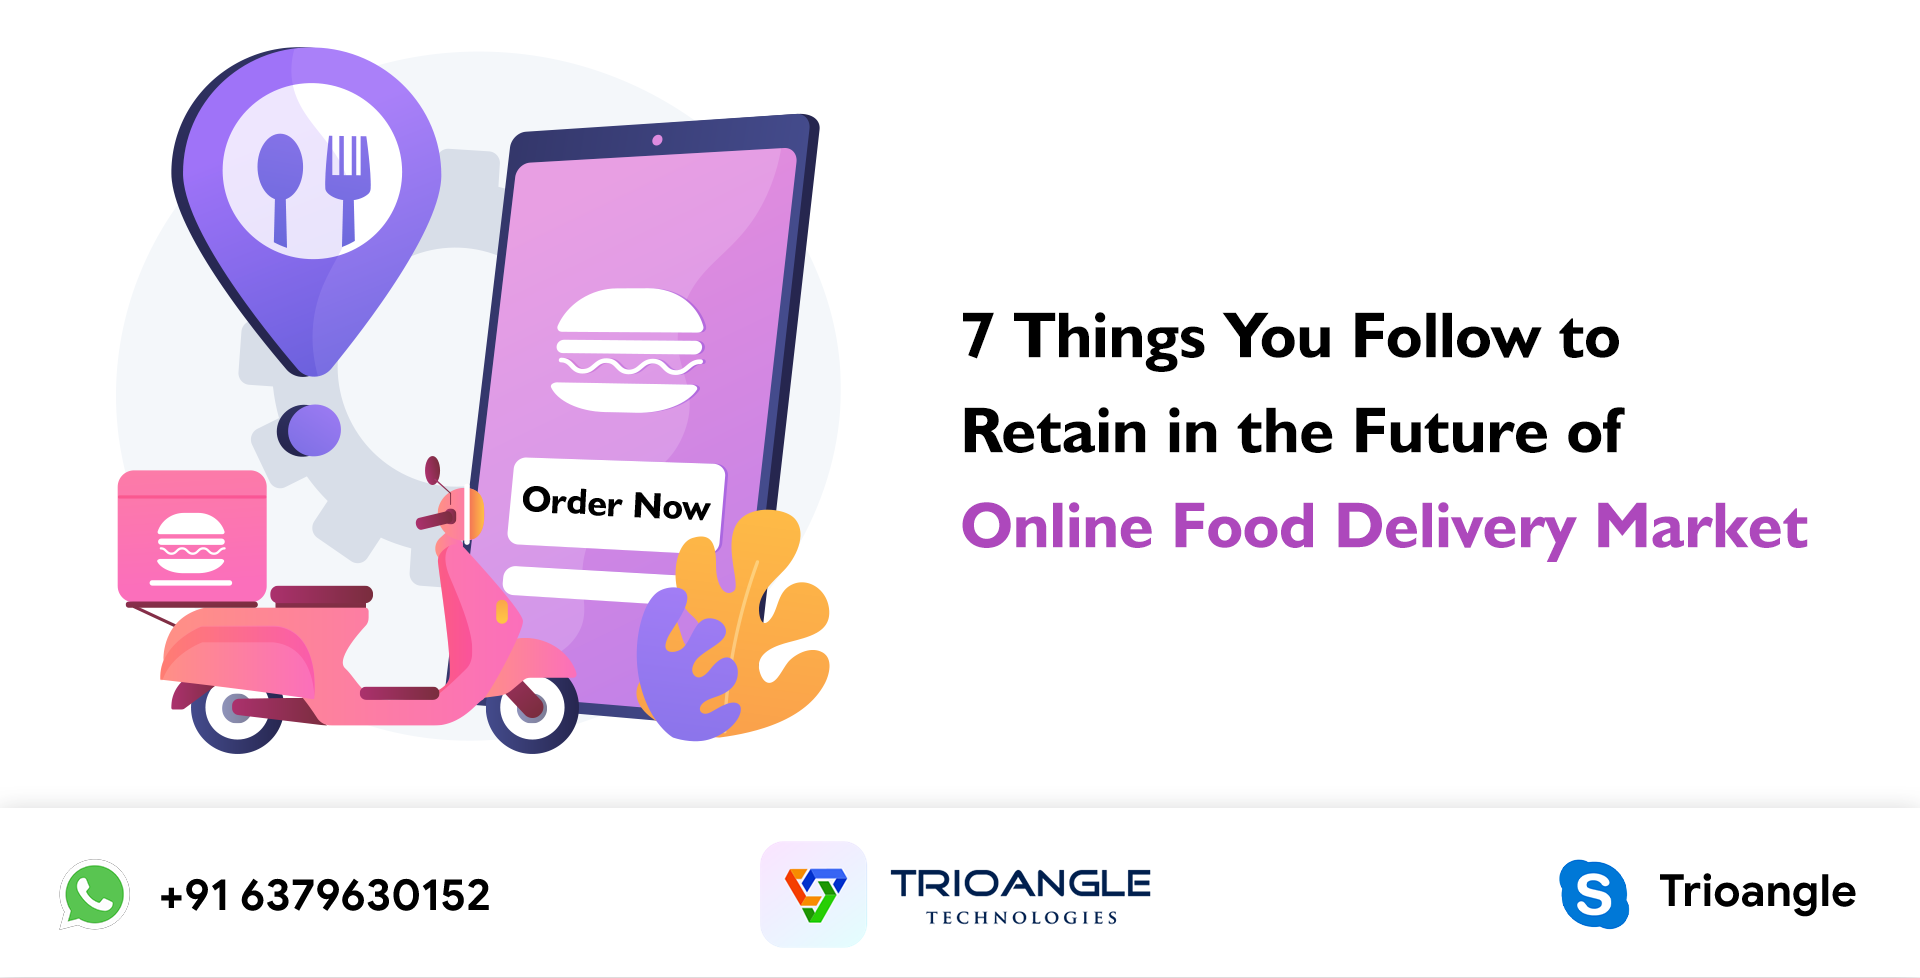 7 Things You Follow to Retain in the Future of Online Food Delivery Market